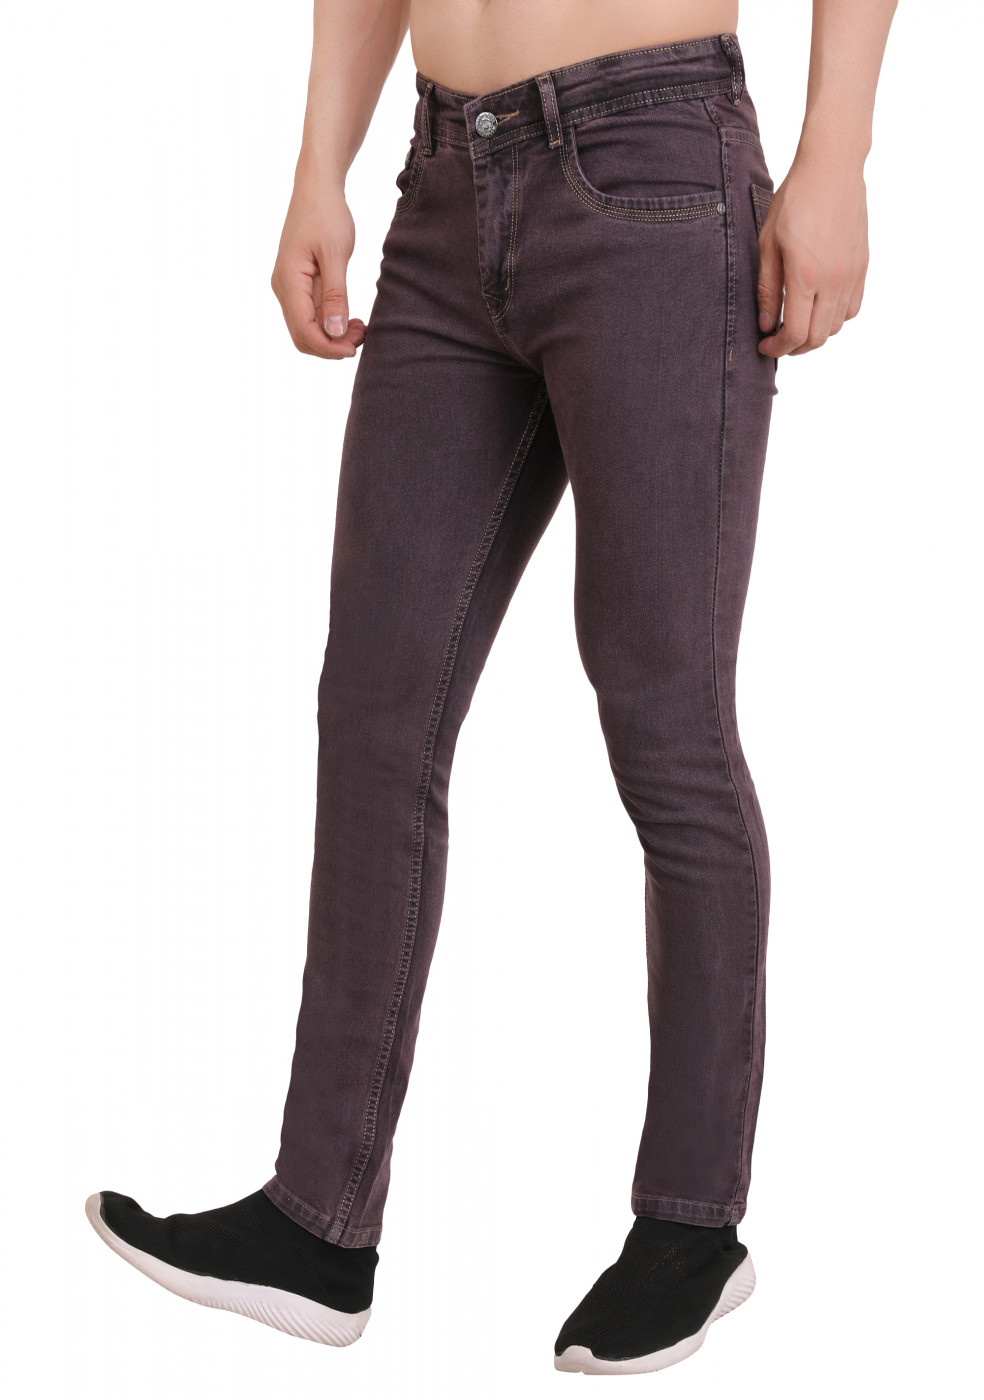 Cherry Comfortable Jeans For Men